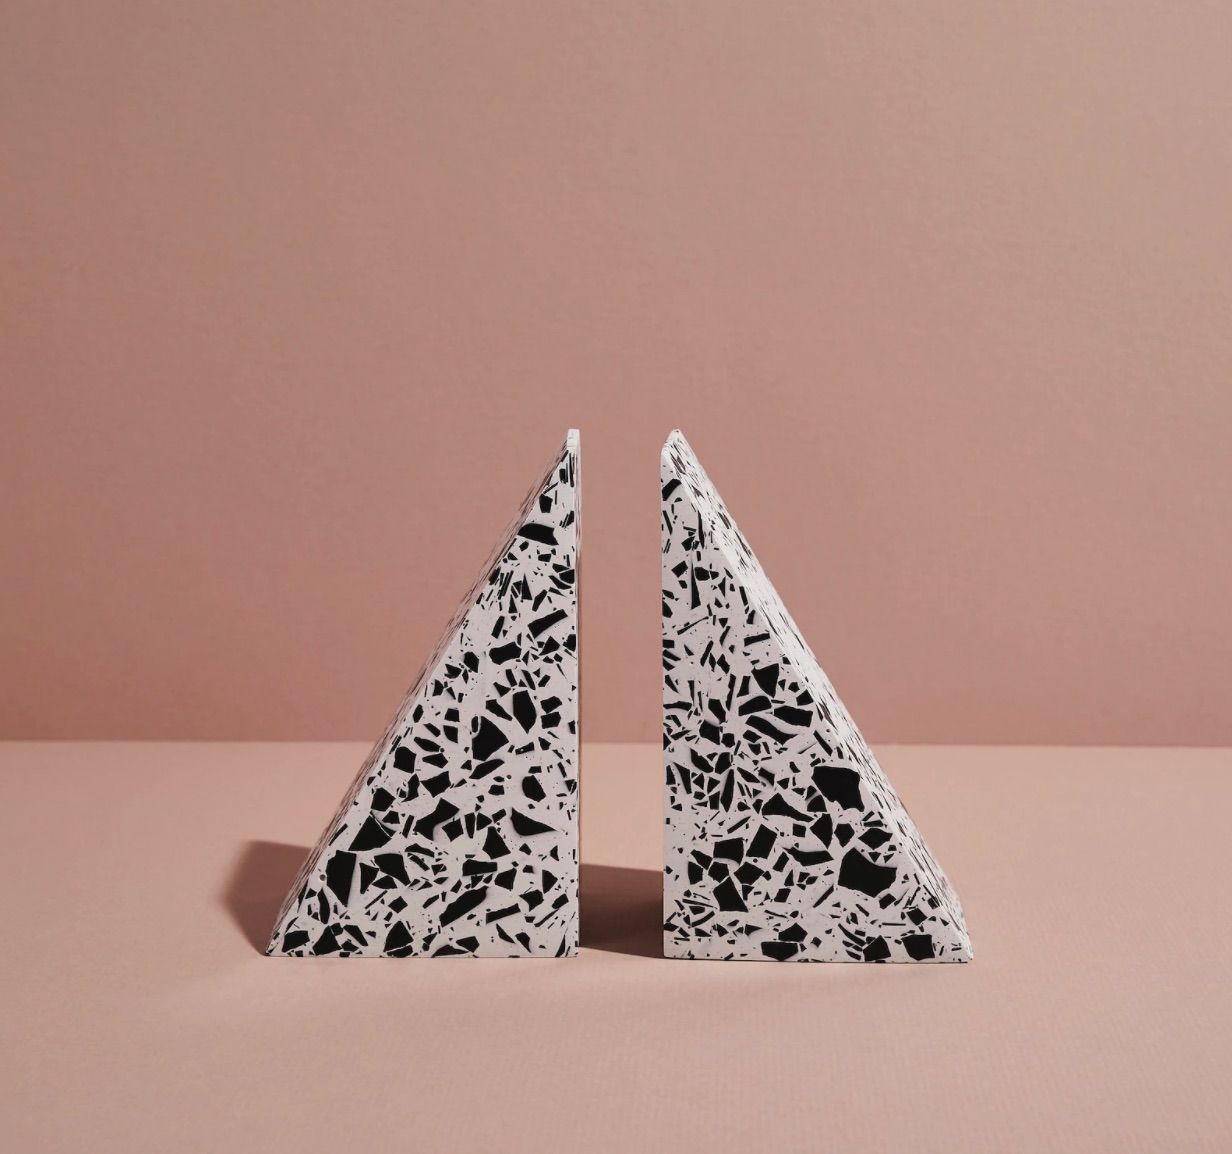 Pair of white bookends flecked with black. They are in the shape of triangles. 